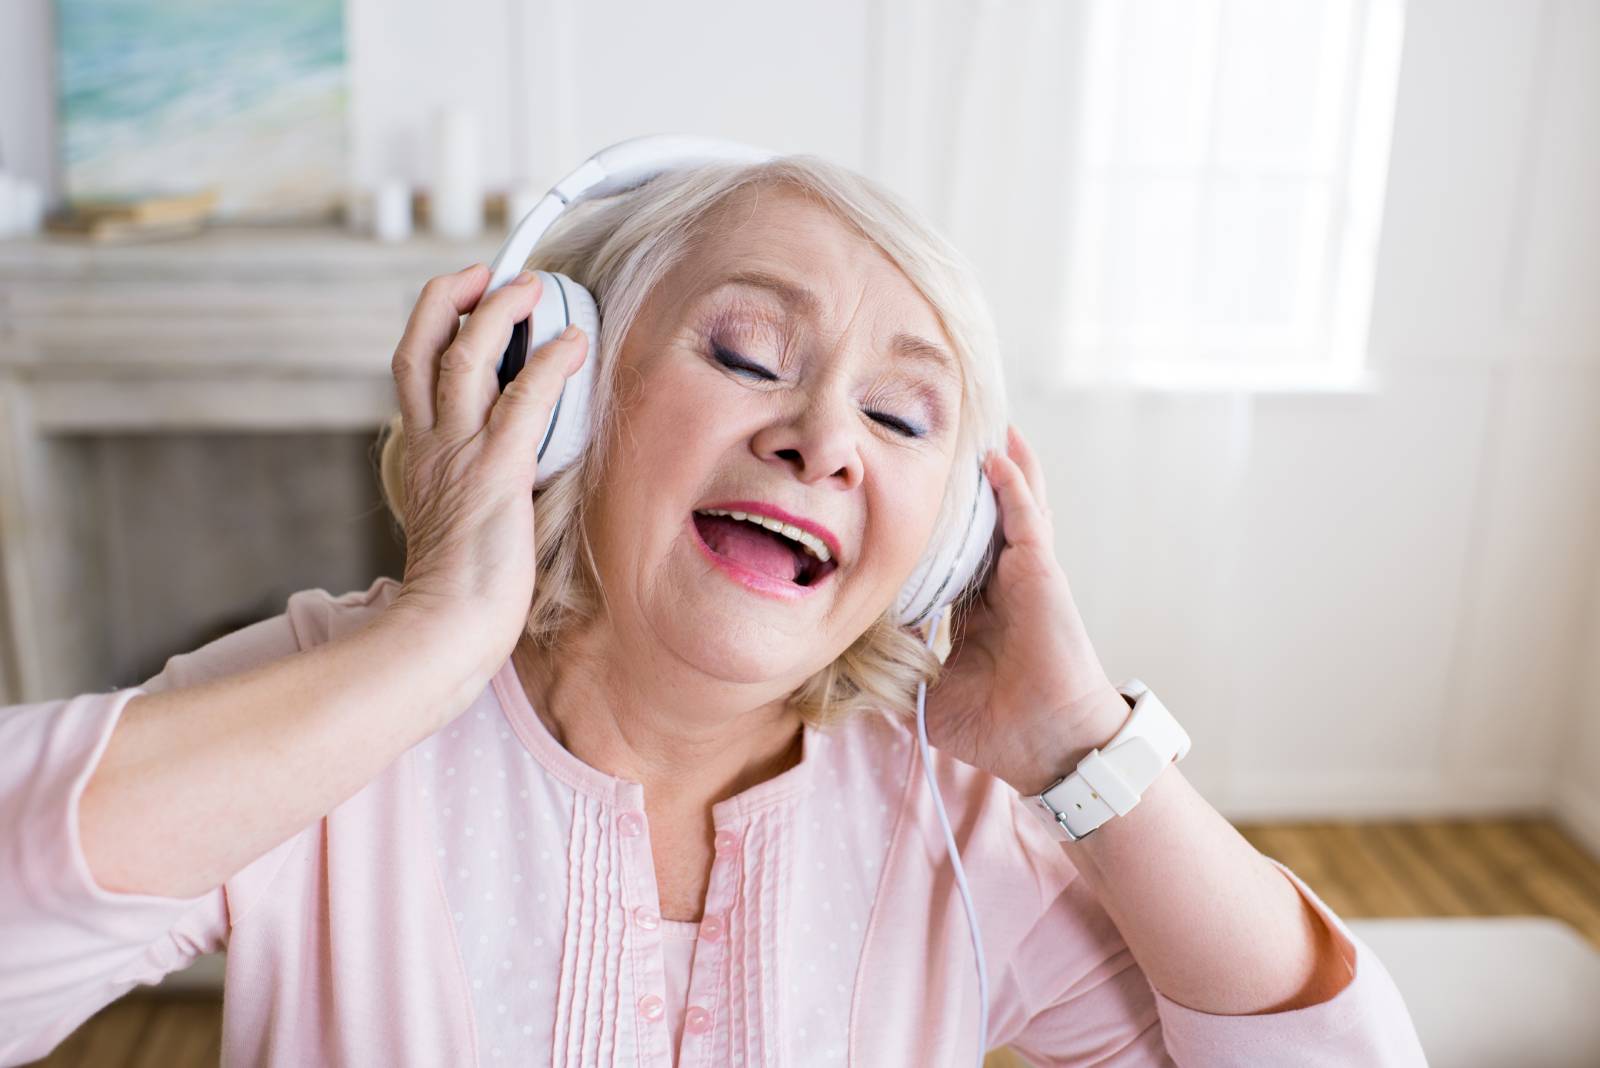 Woman with dementia listening to music through headphones and singing.